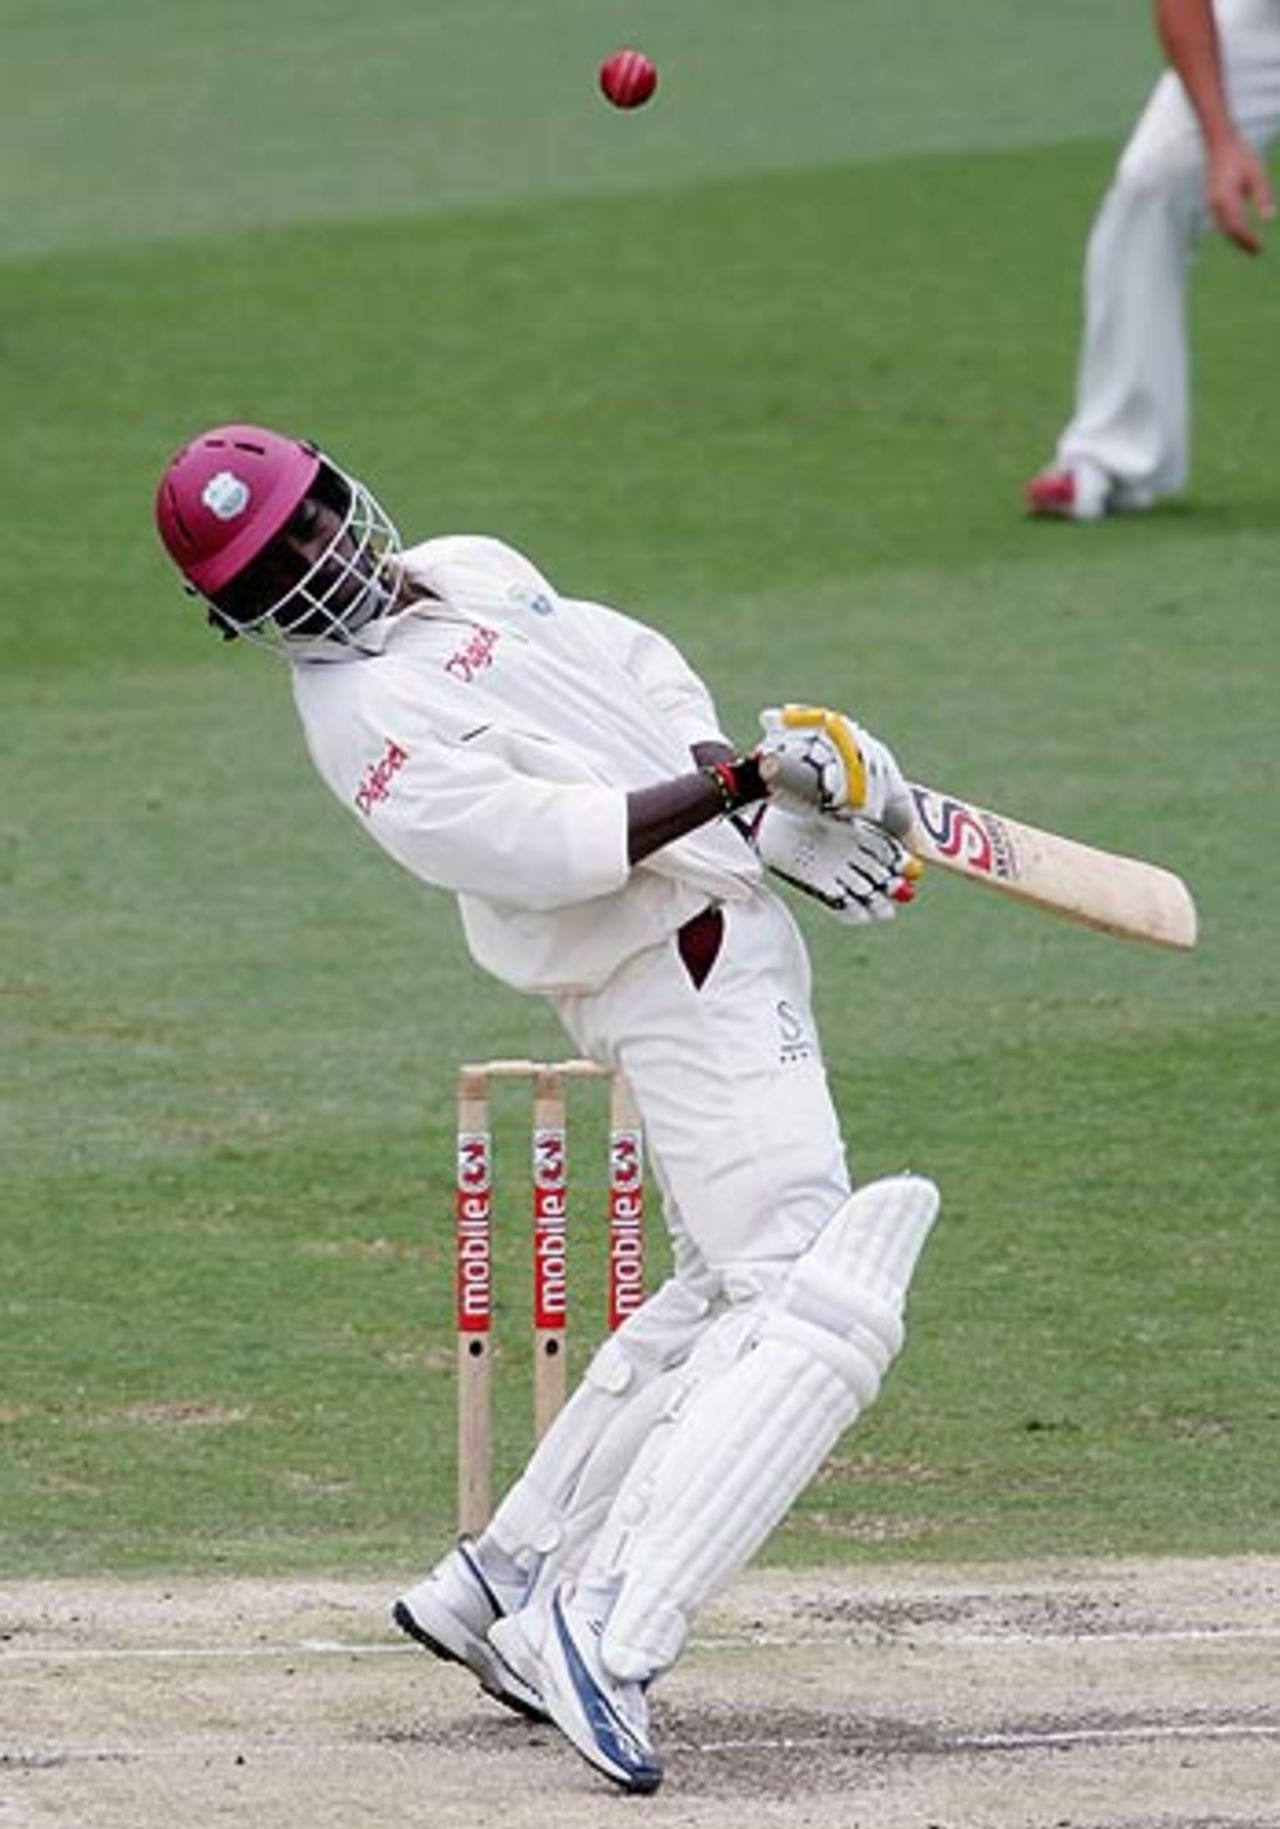 Chris Gayle swerves out of the way, 1st Test, Brisbane, 4th day, November 5, 2005